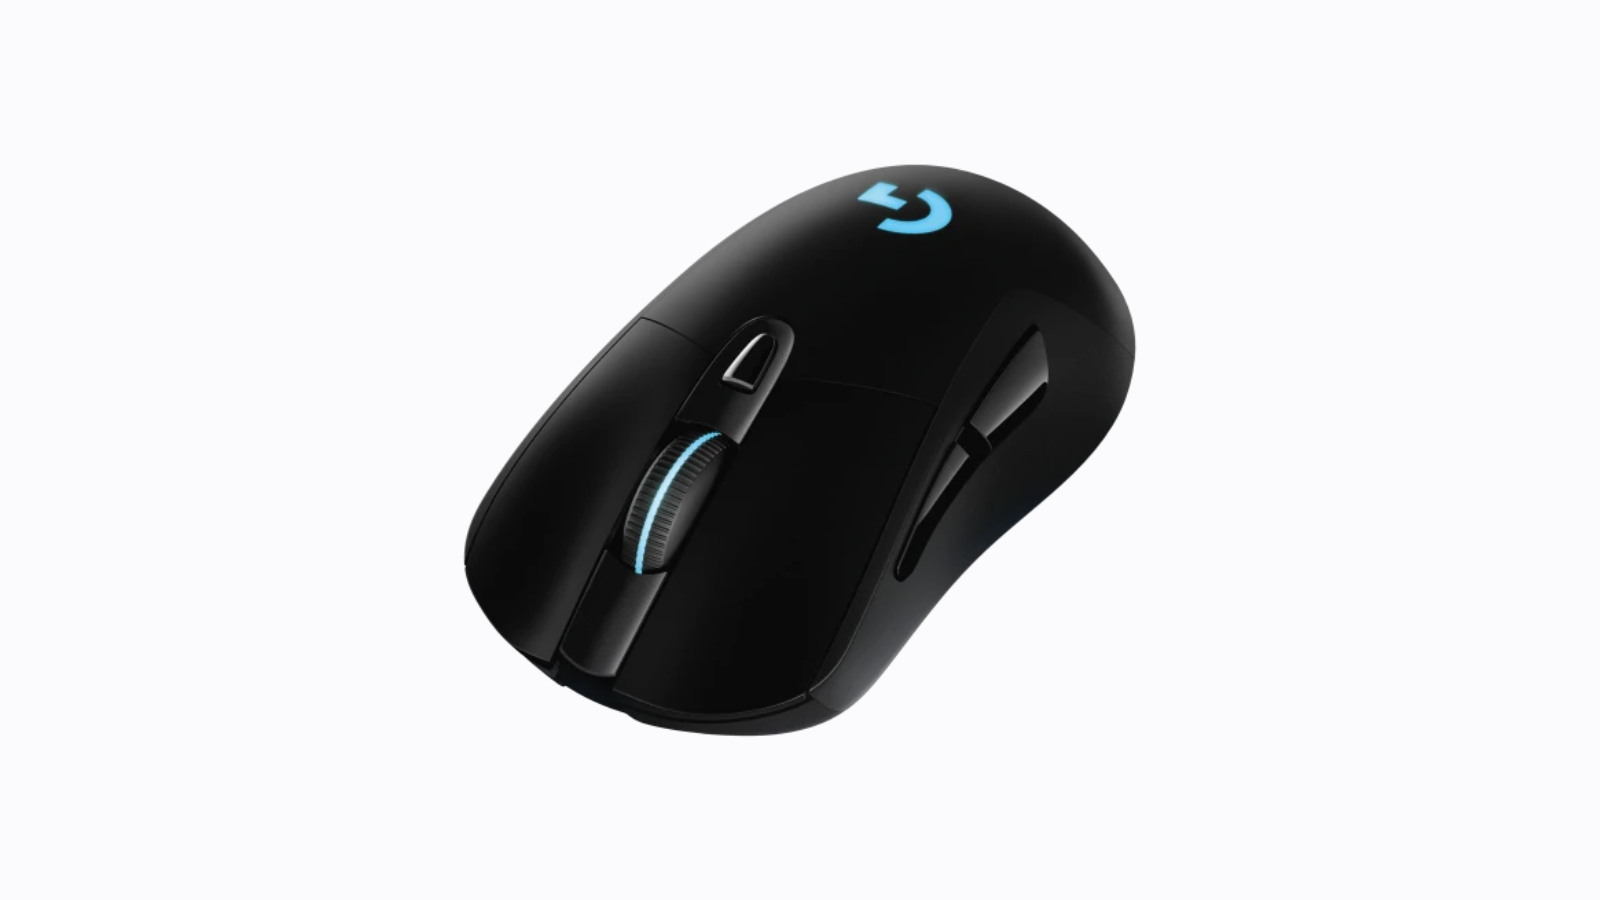 Logitech's G703 Lightspeed charges wirelessly on your mousepad